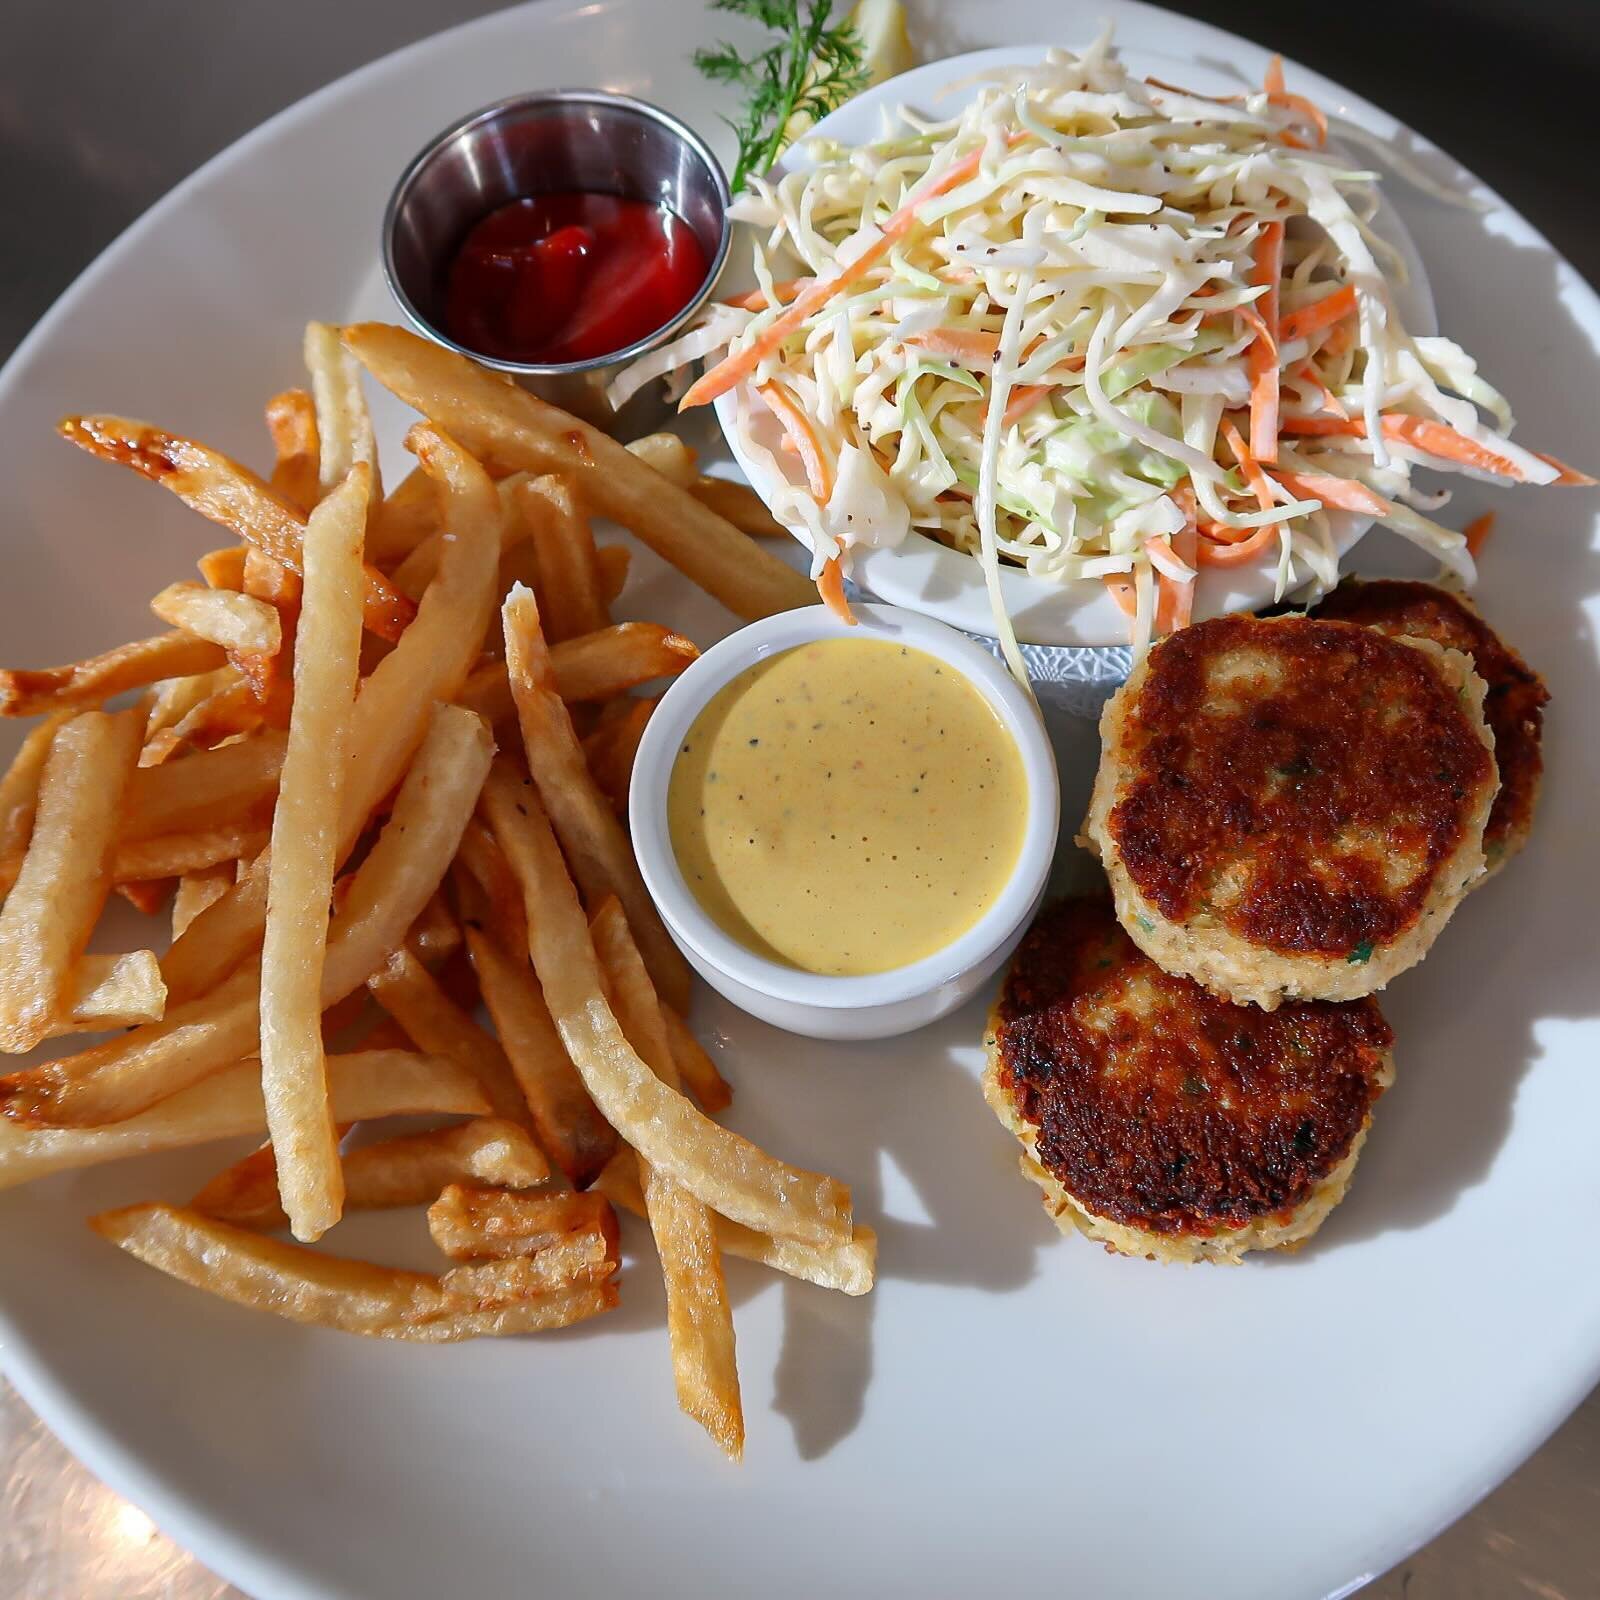 crabcakes * 🦀
roasted potatoes, asparagus &amp; aji amarillo sauce
*also available as an entr&eacute;e size w/fries &amp; coleslaw

1020 Post Road Darien, CT 06820
203 655 1020

#connecticuteats #203local #connecticutfoodie #cteats #foodie